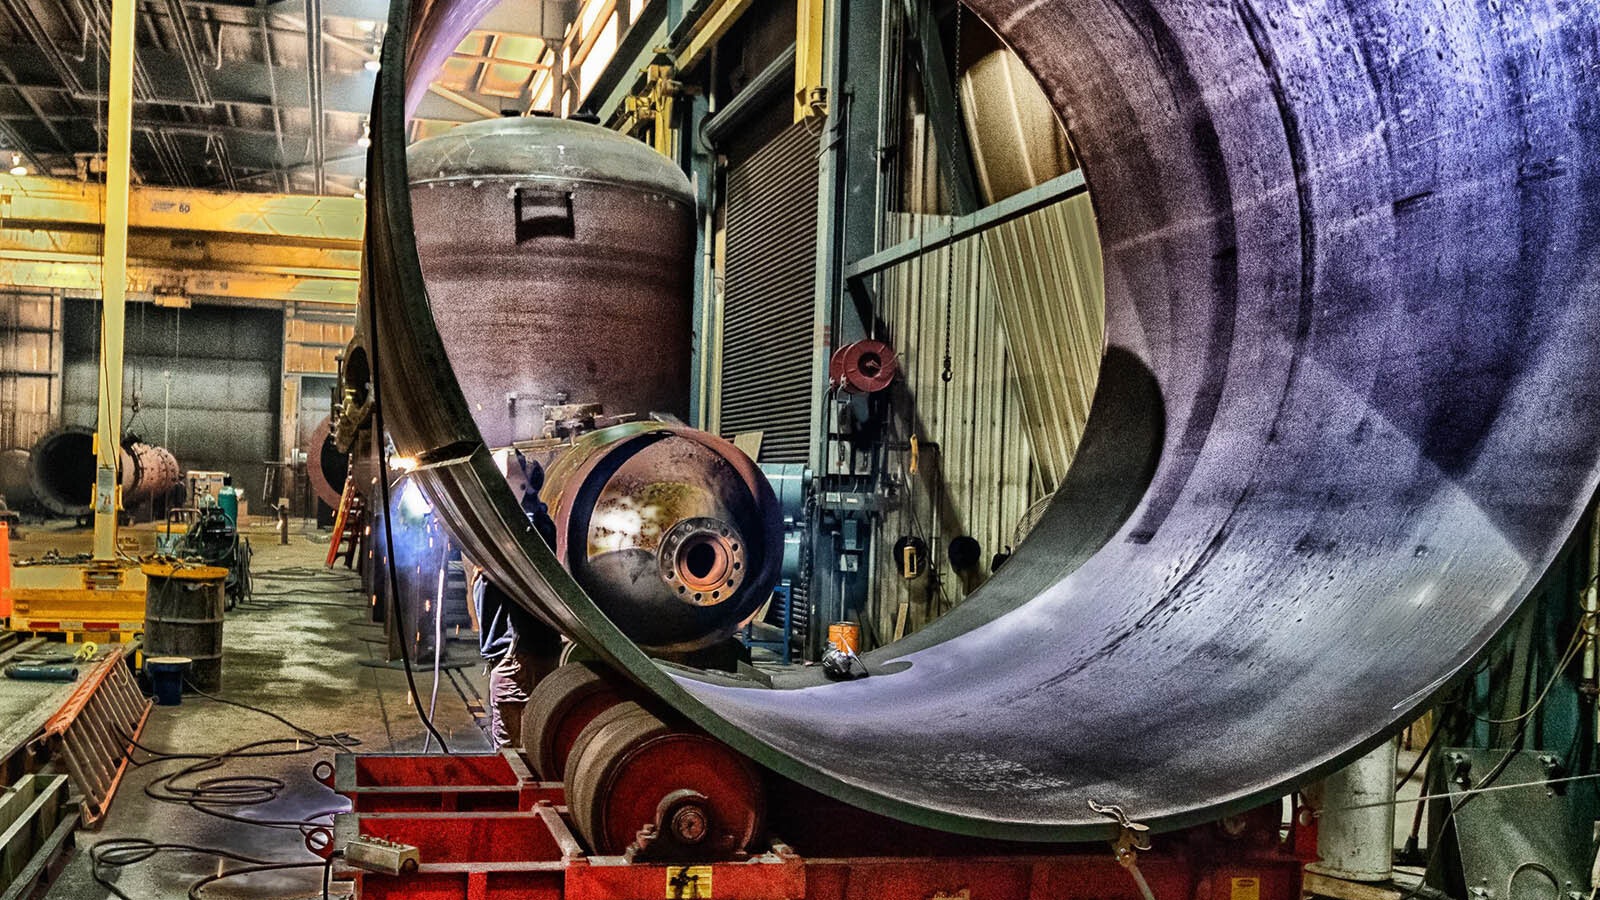 There's nothing small-time about the work being done in the High Country Fabrication plant in Casper, Wyoming.